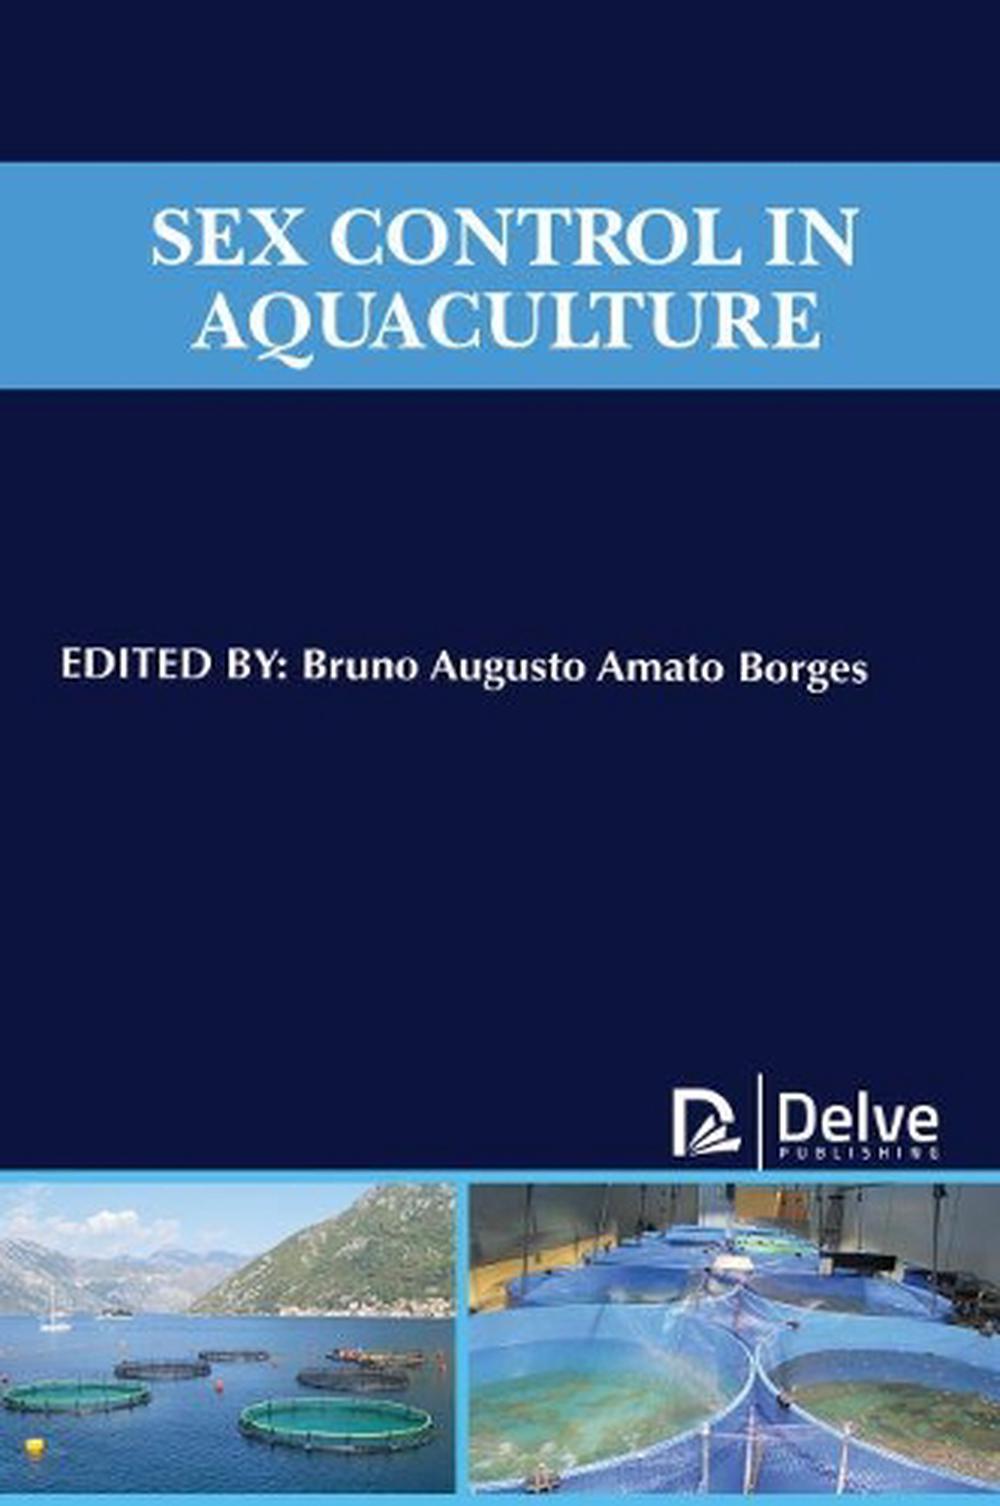 Sex Control In Aquaculture By Bruno Augusto Amato Borges Hardcover 9781773615523 Buy Online 2491